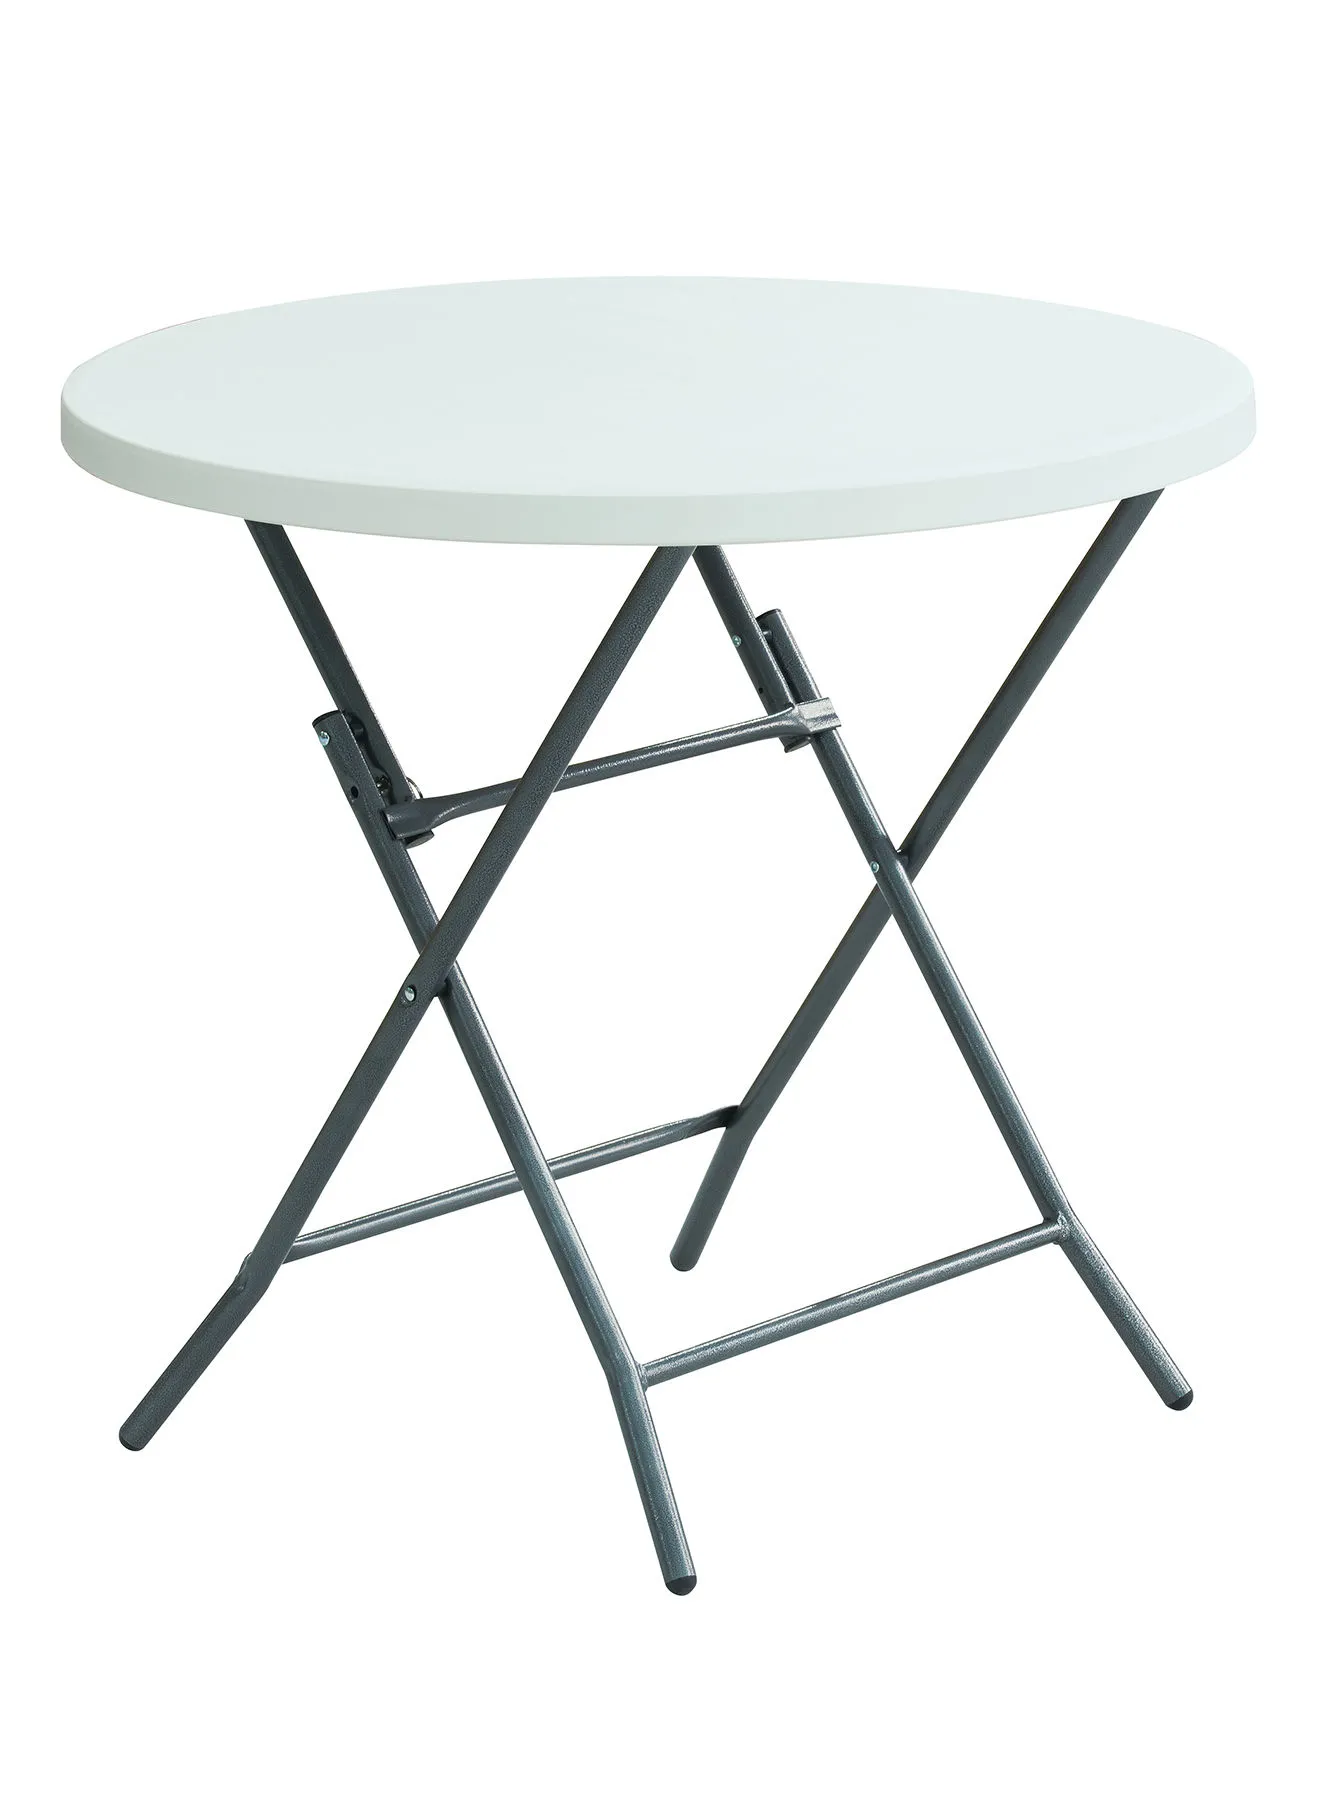 Amal Plastic Foldable Table - Outdoor And Camping - White Plastic 99 X 81 X 5 Cm Round best white 99 X 81 X 5cm